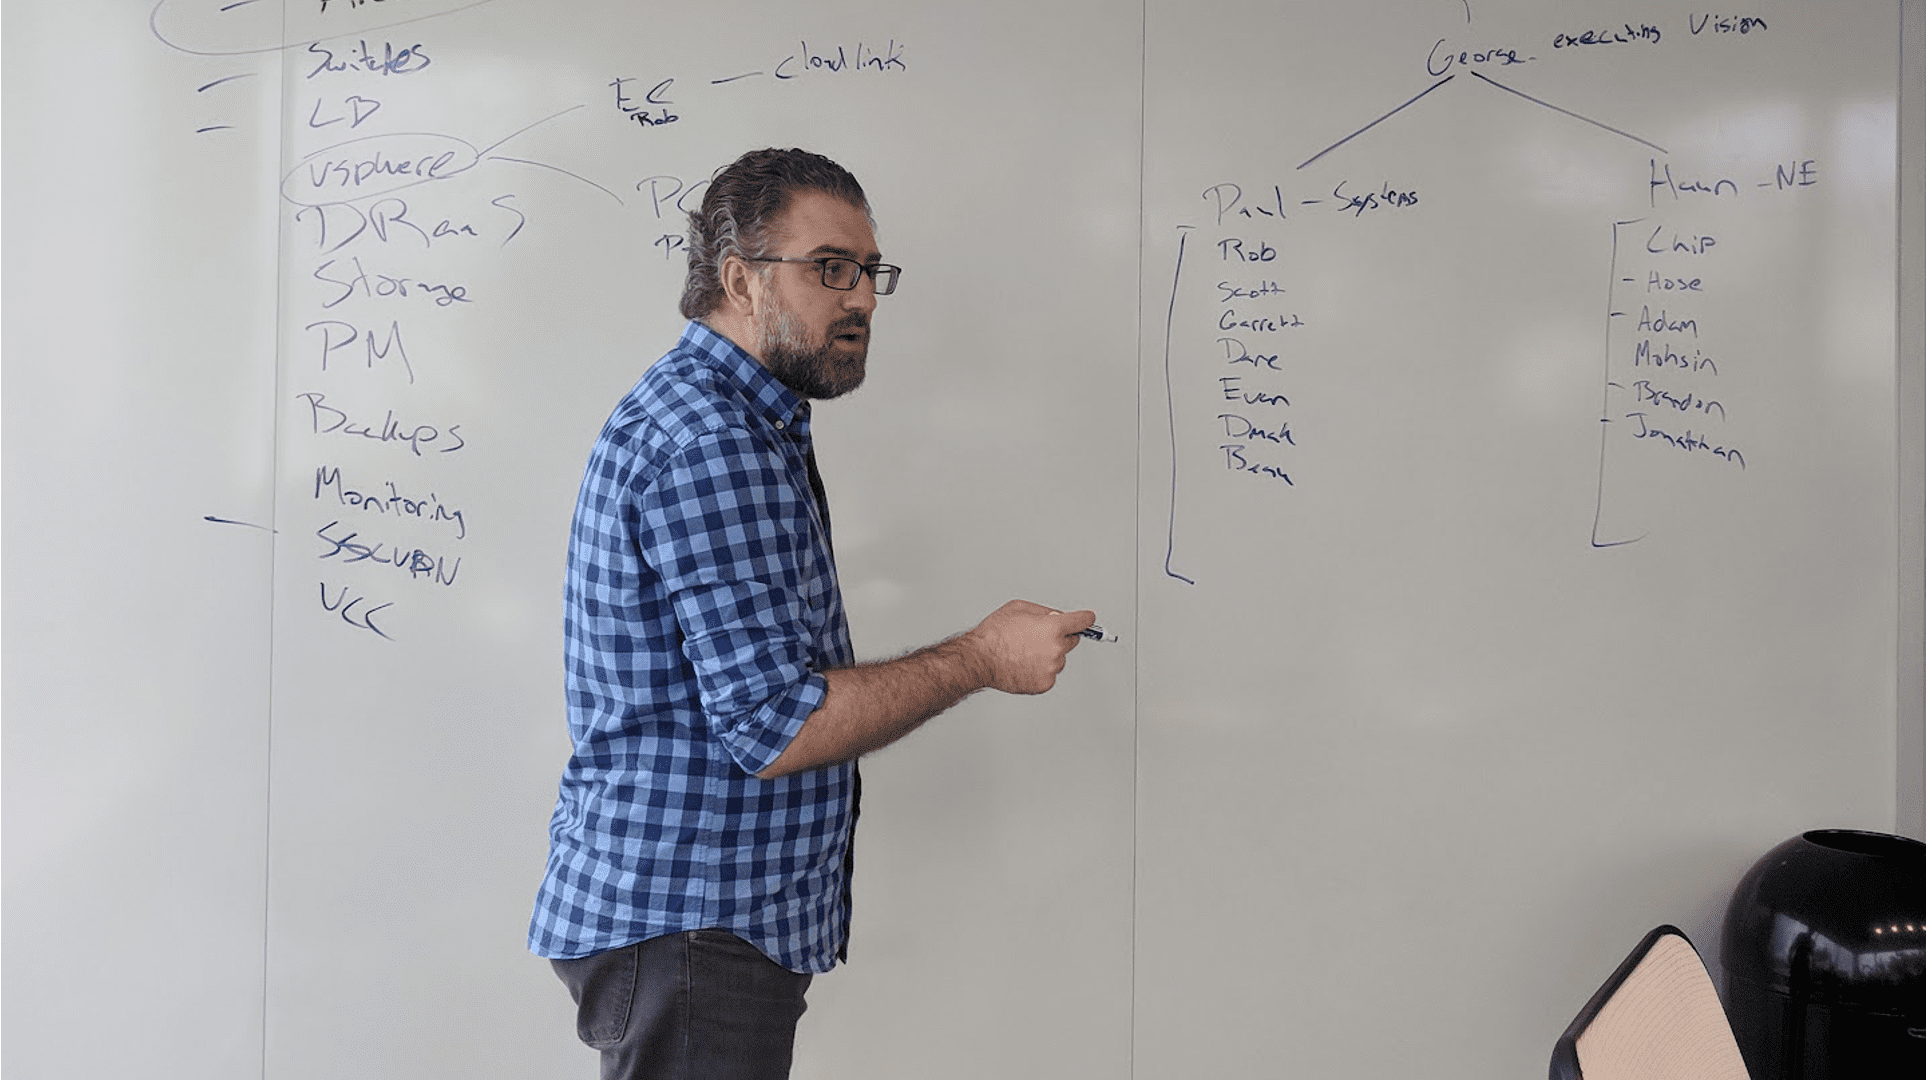 man stands in front of whiteboard